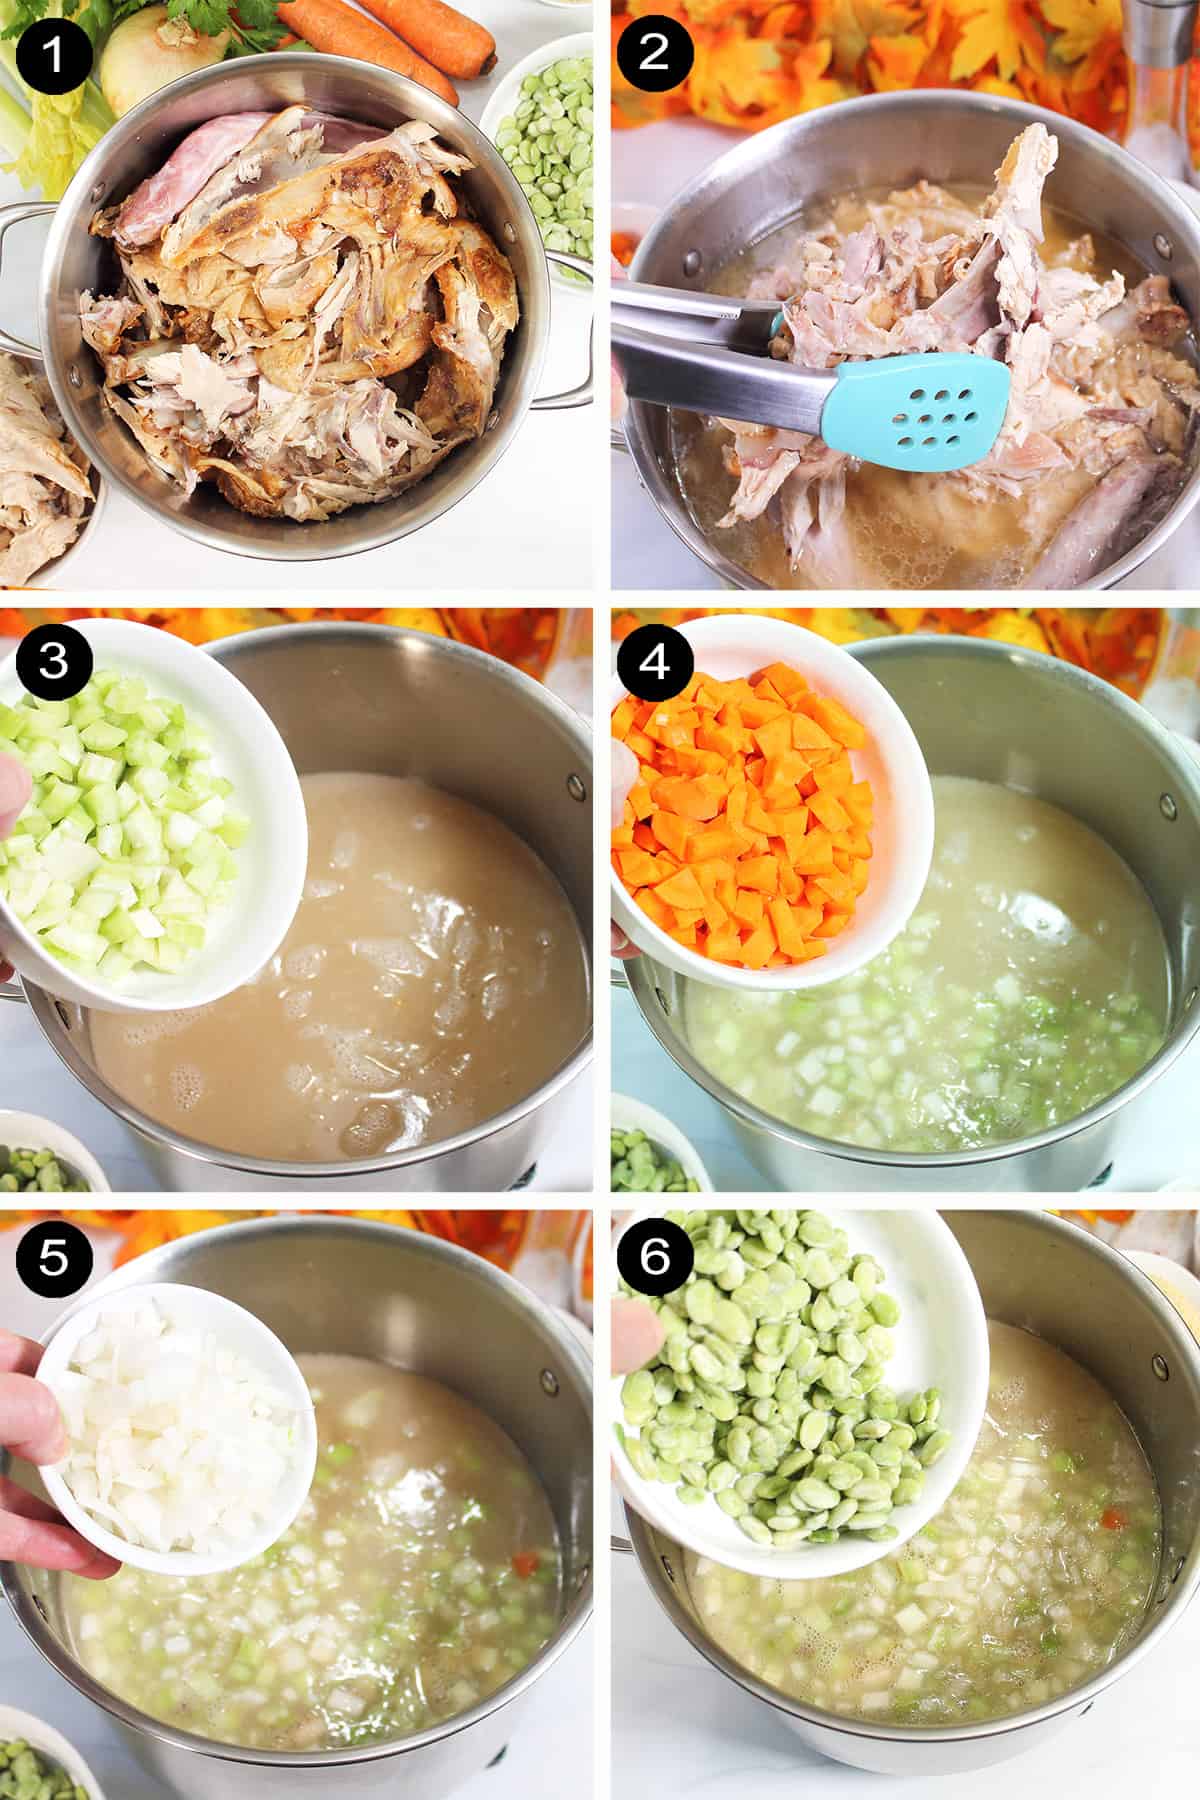 Collage of steps 1-6 to make turkey vegetable soup.